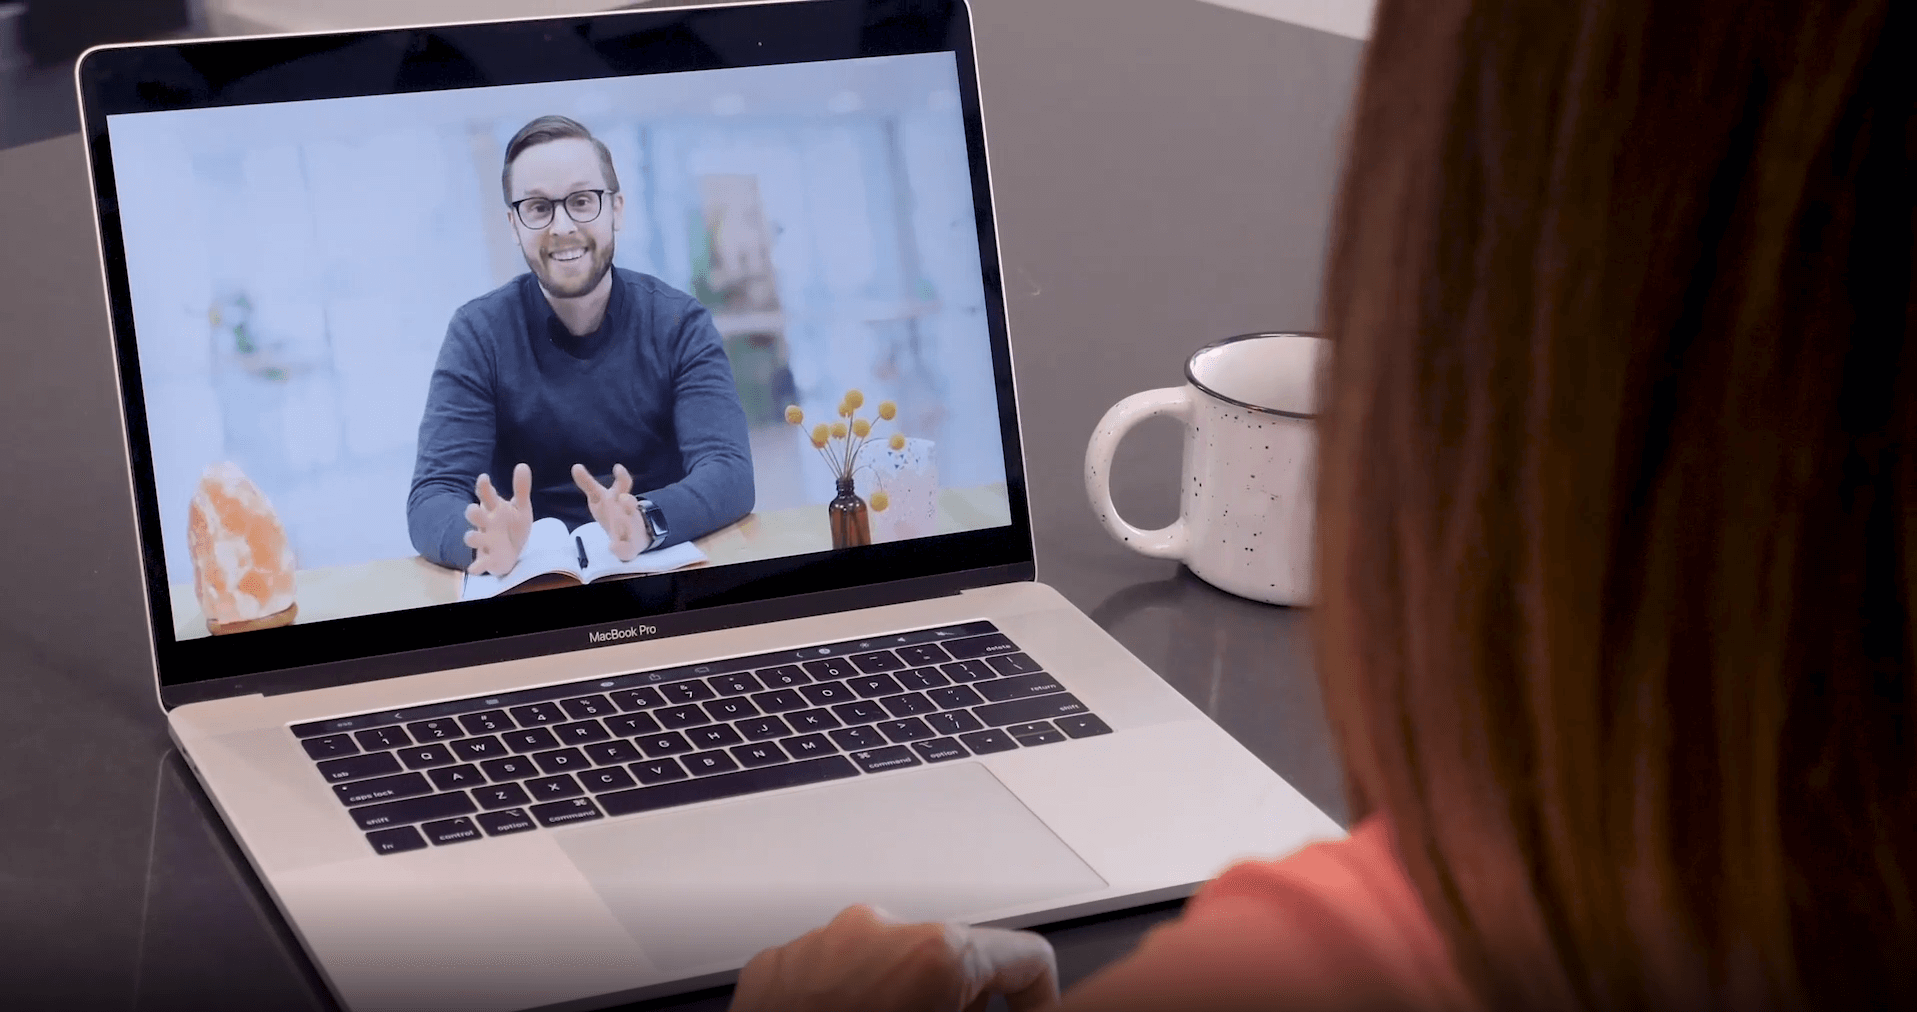 5 Tips for Mastering Videoconferencing at Home